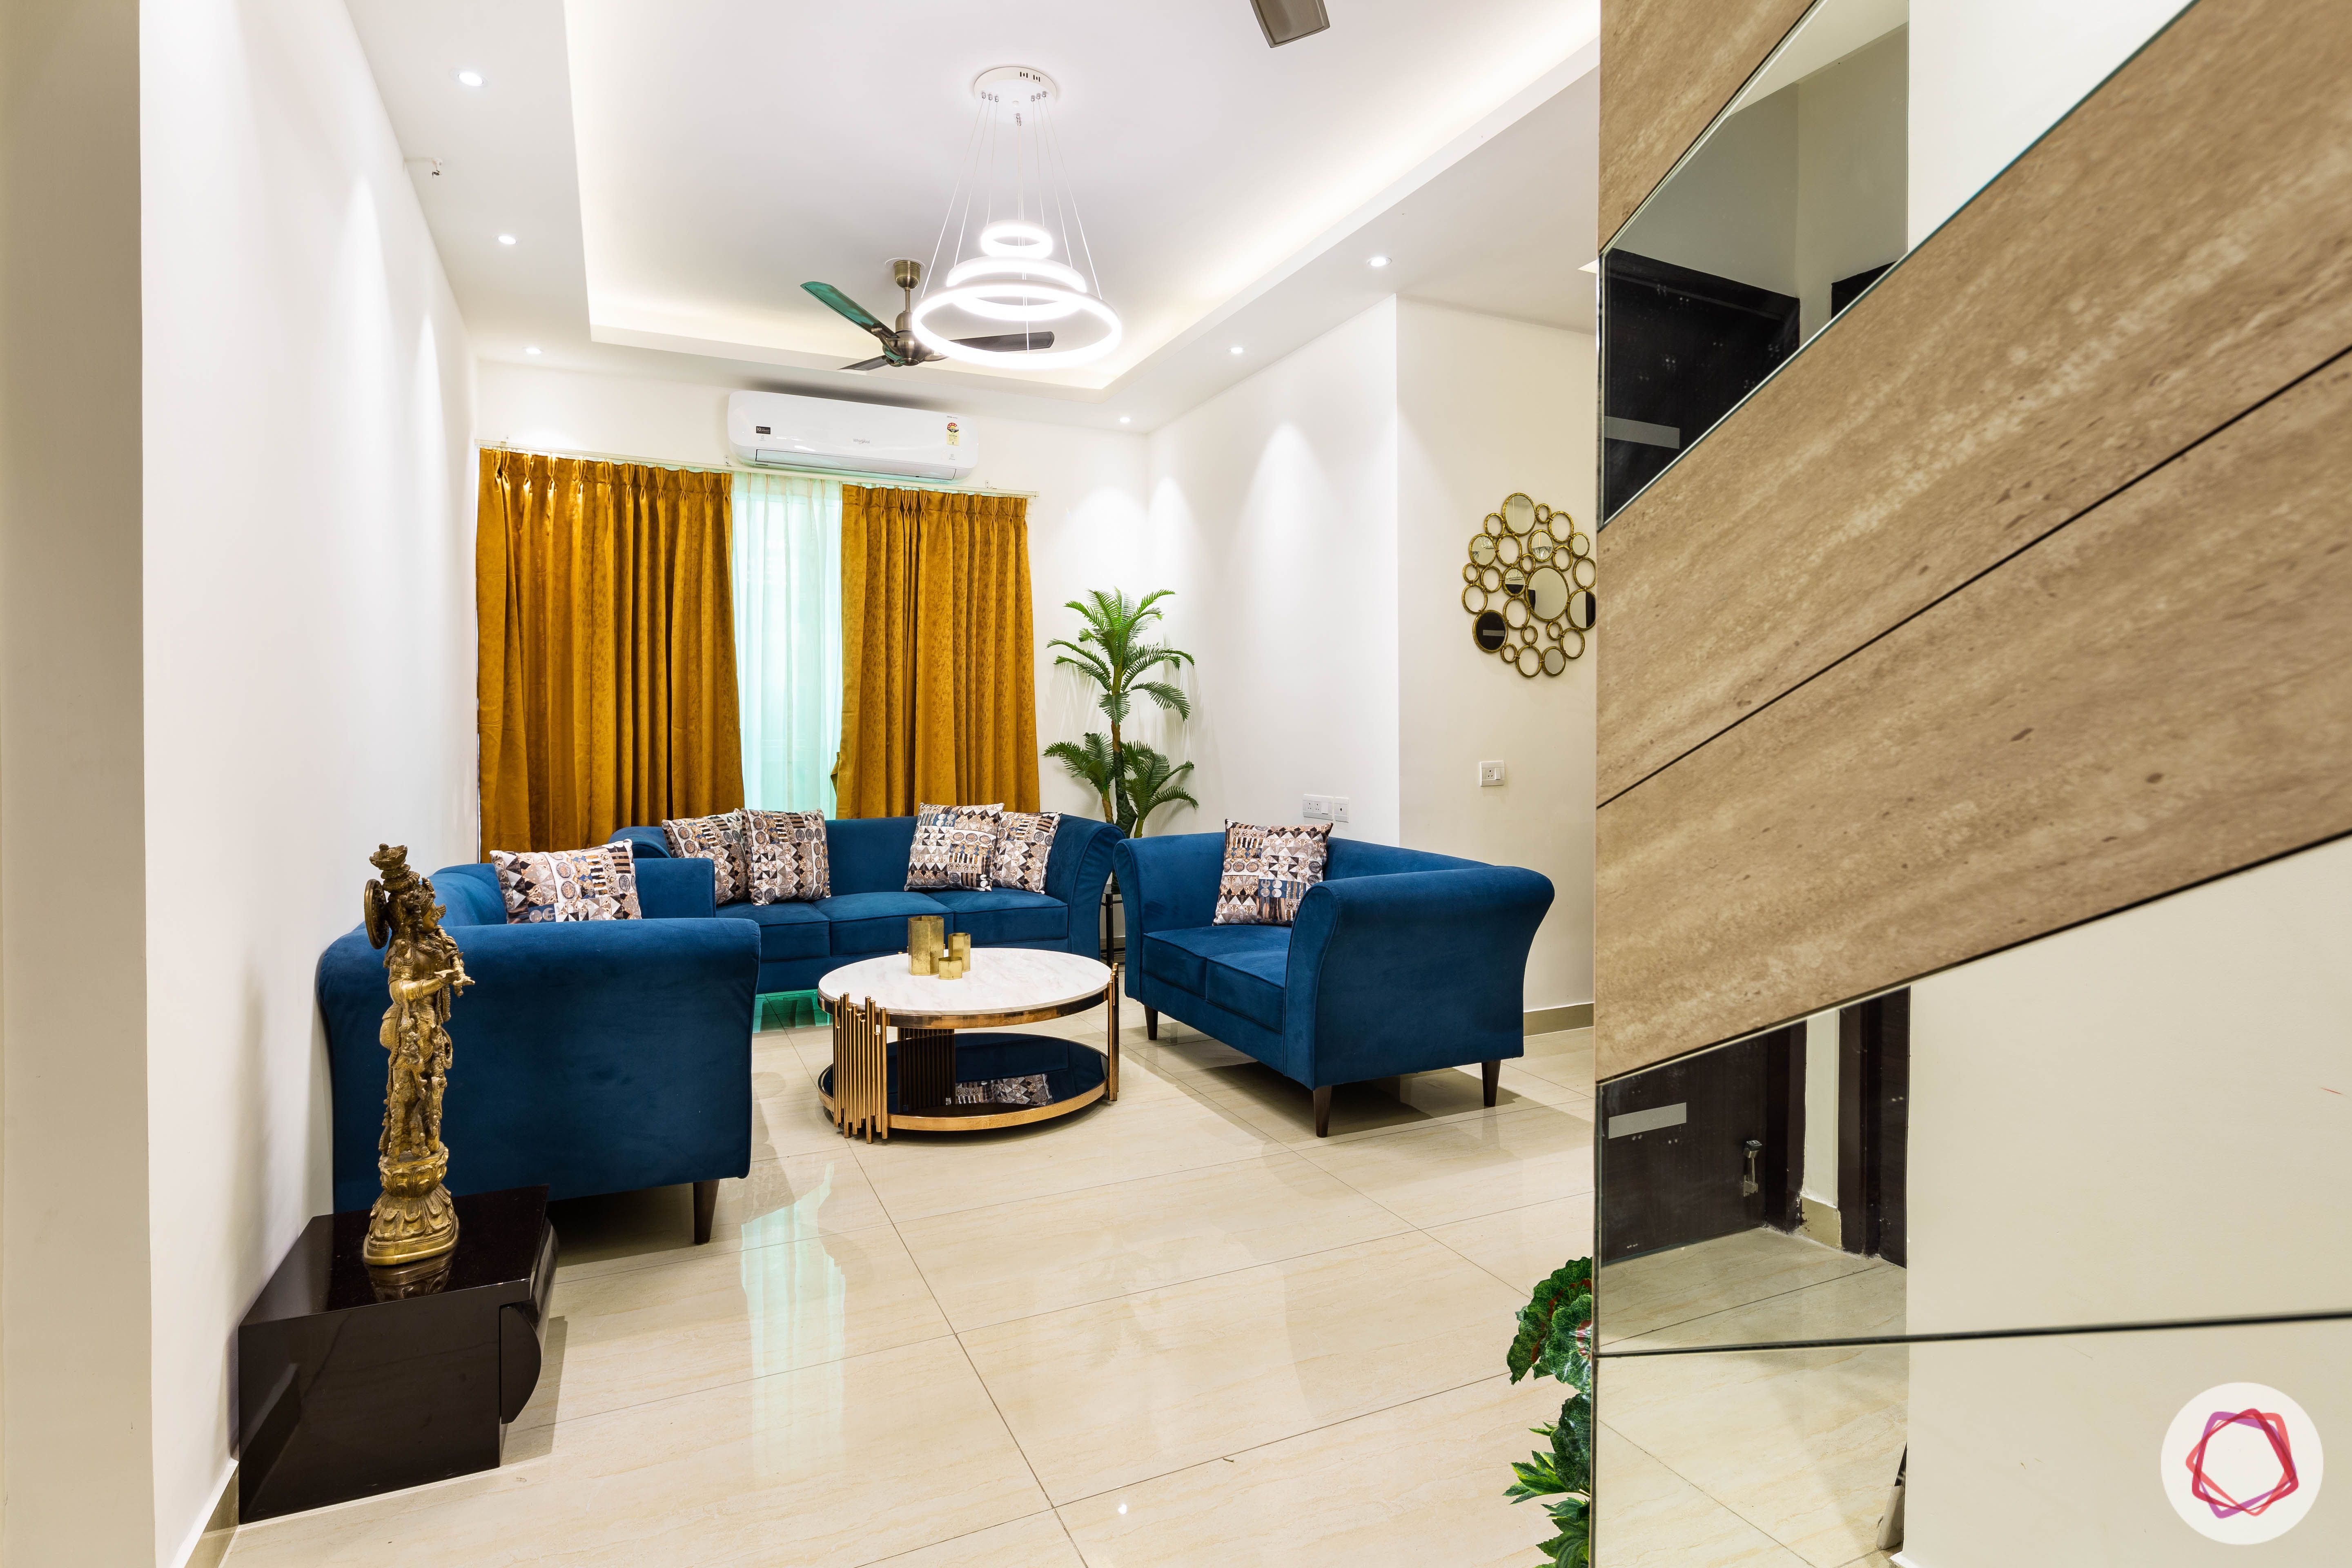 3 bhk flat-living room-entrance-blue sofas-yellow curtains